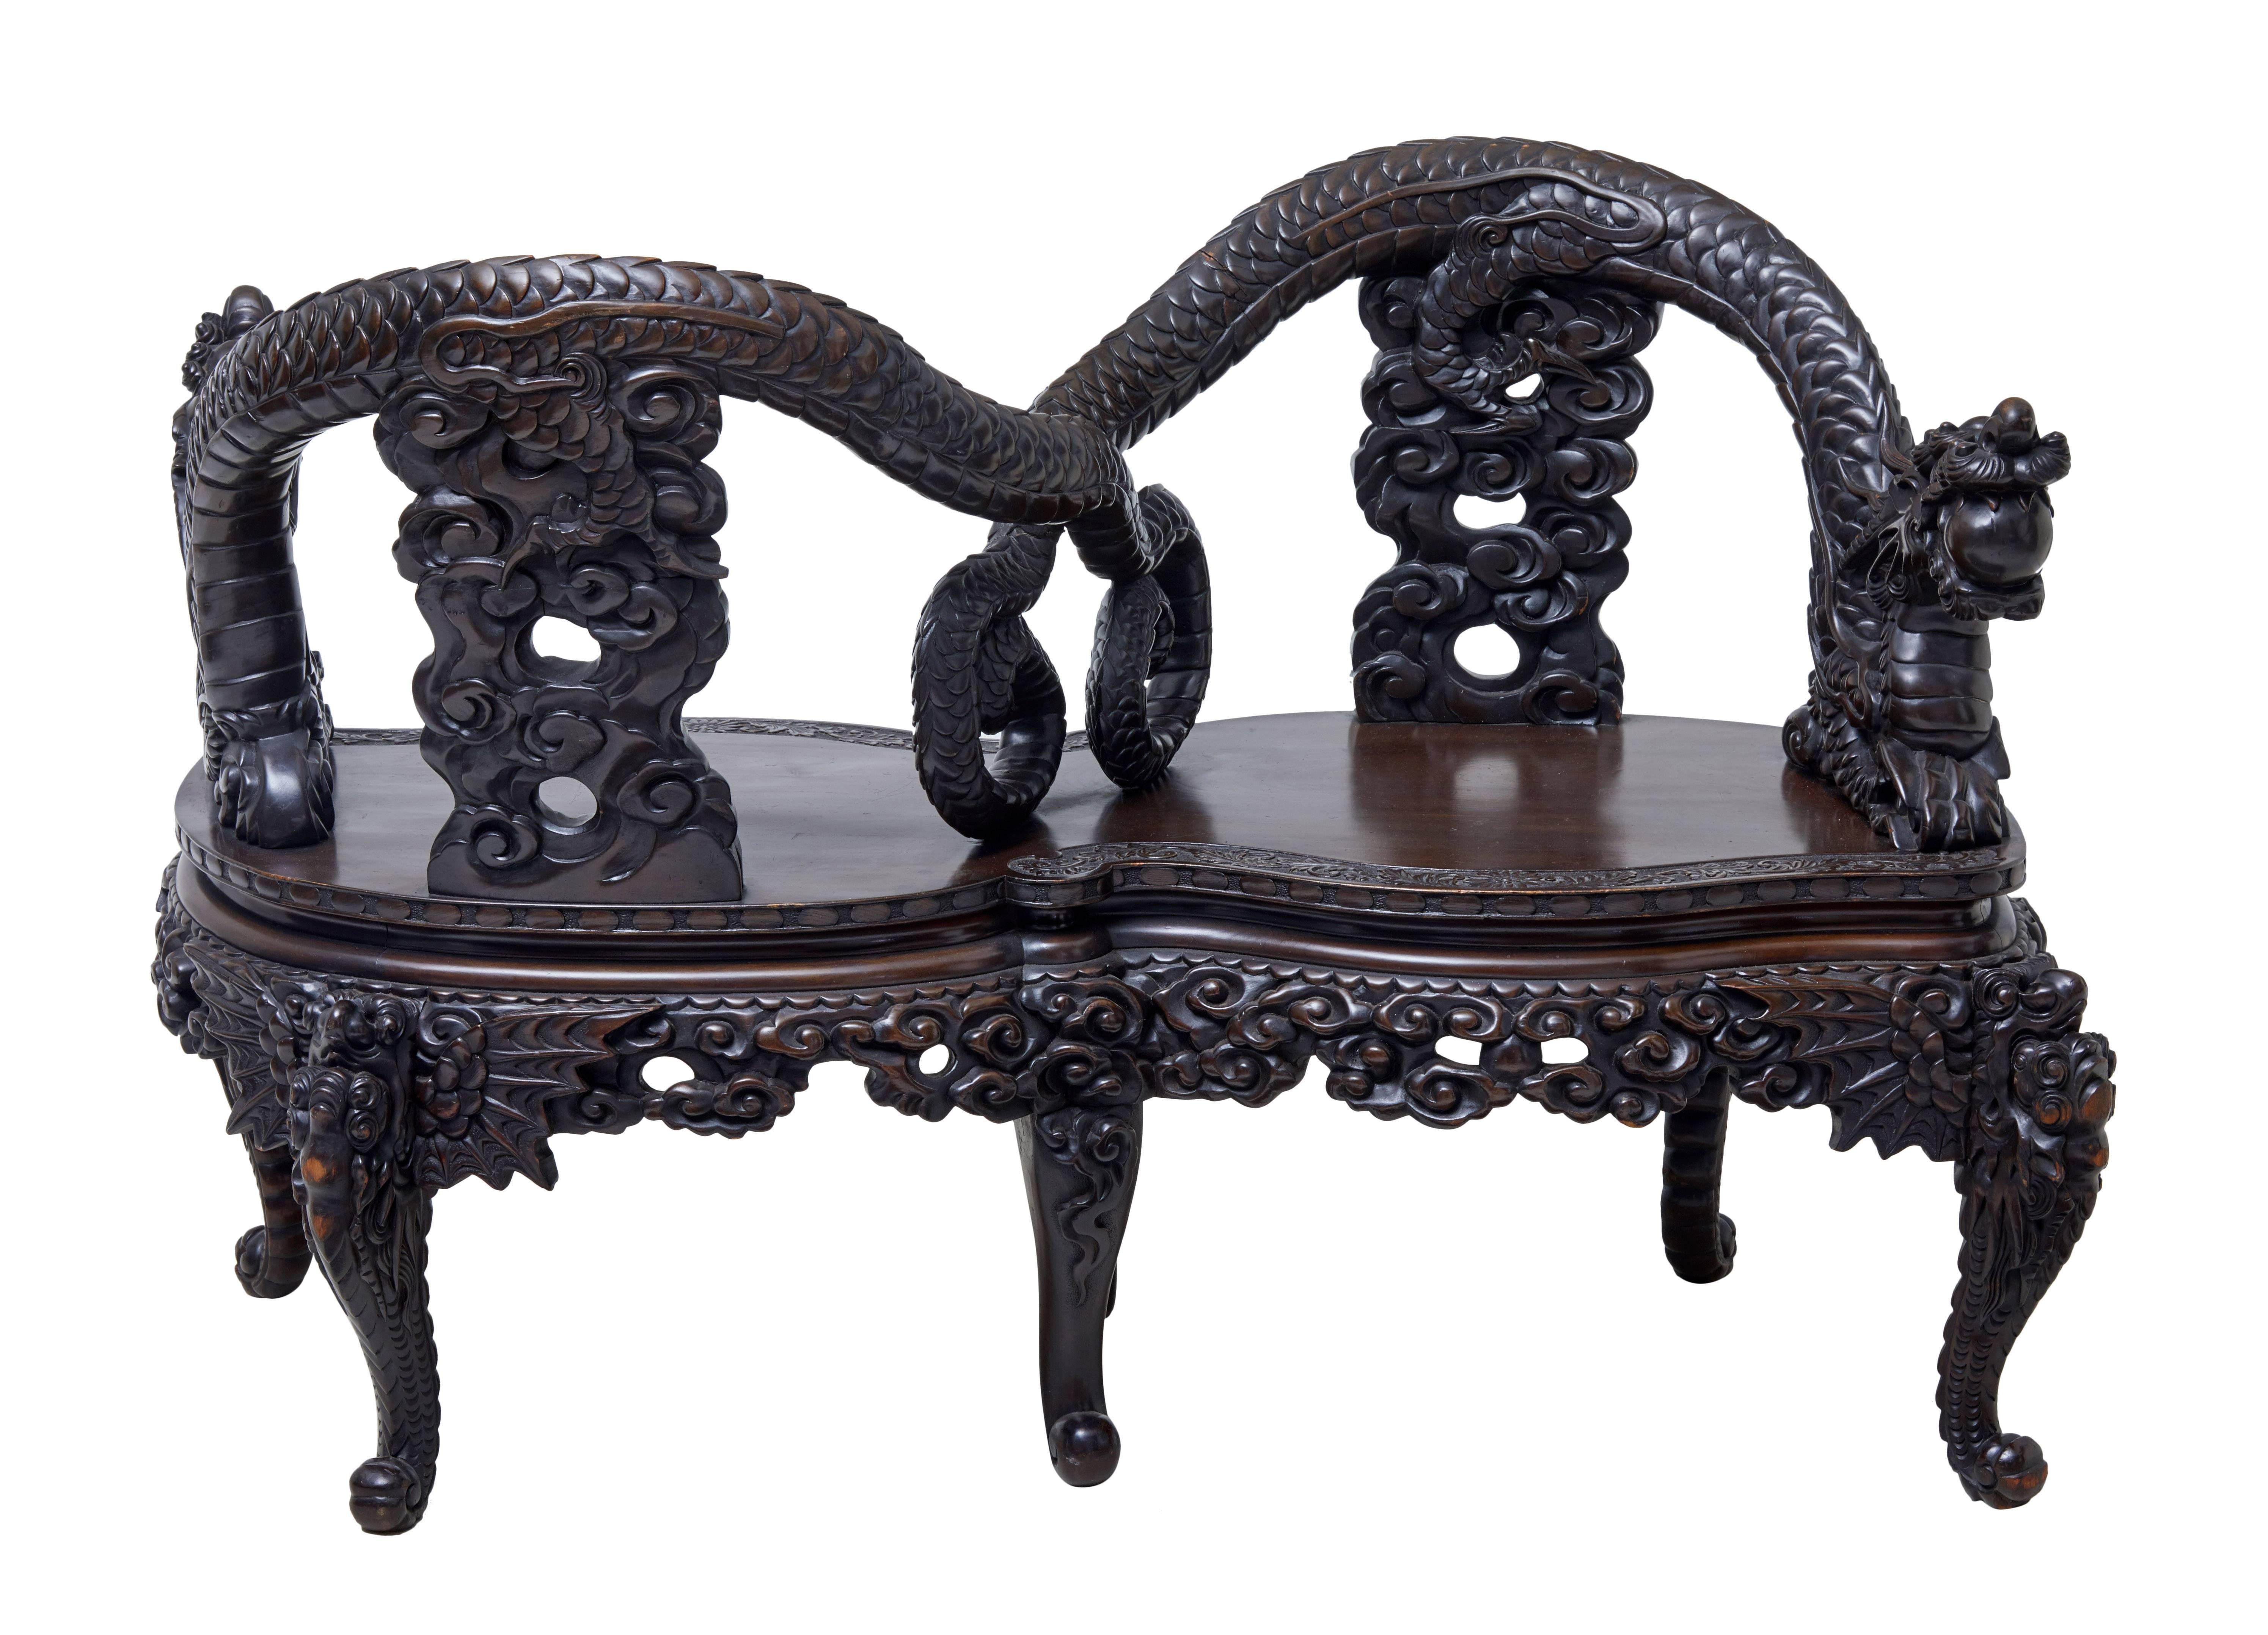 Decorative Chinese export profusely carved loveseat, circa 1900.

Made from hard wood similar to elm.

Heavily carved dragons, with the tails forming the back rest and overlapping arms.

Standing on six scrolling legs.

Measures: Seat height